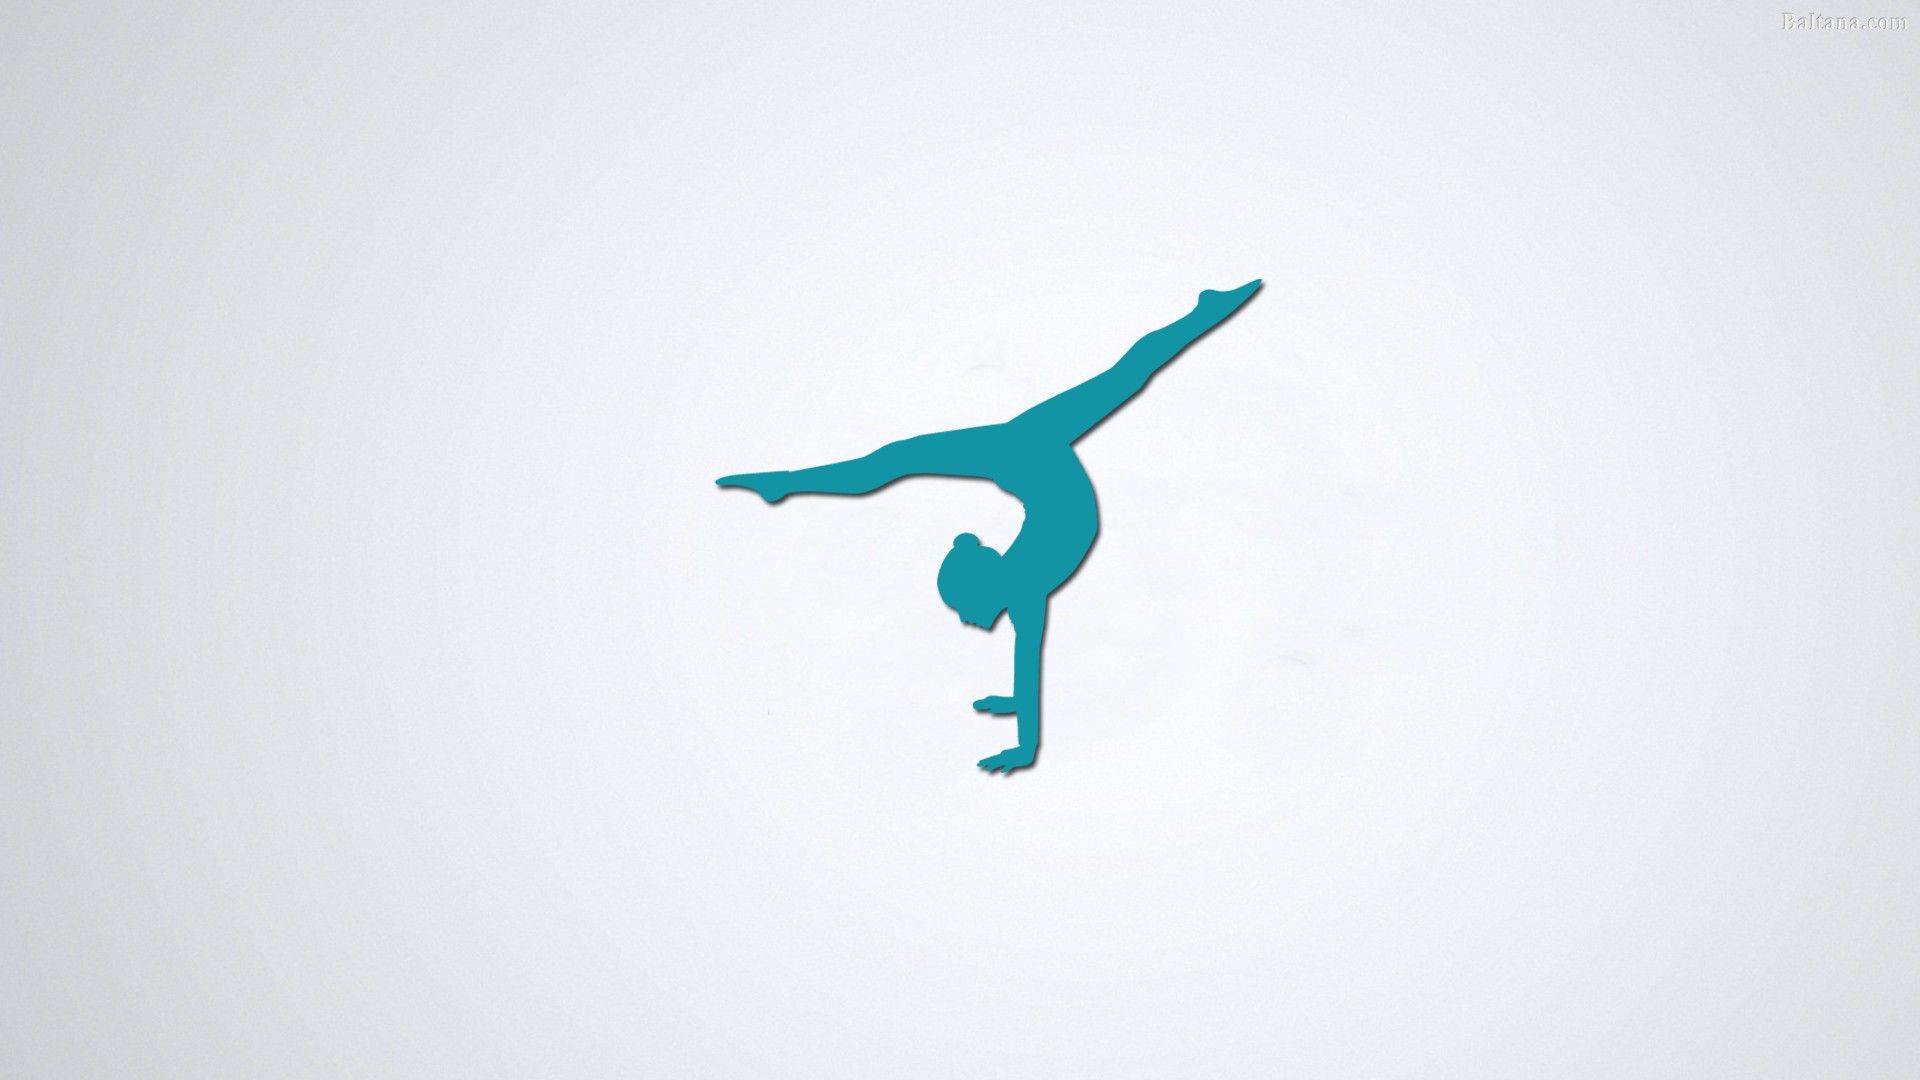 The silhouette of a gymnast doing a handstand - Gymnastics